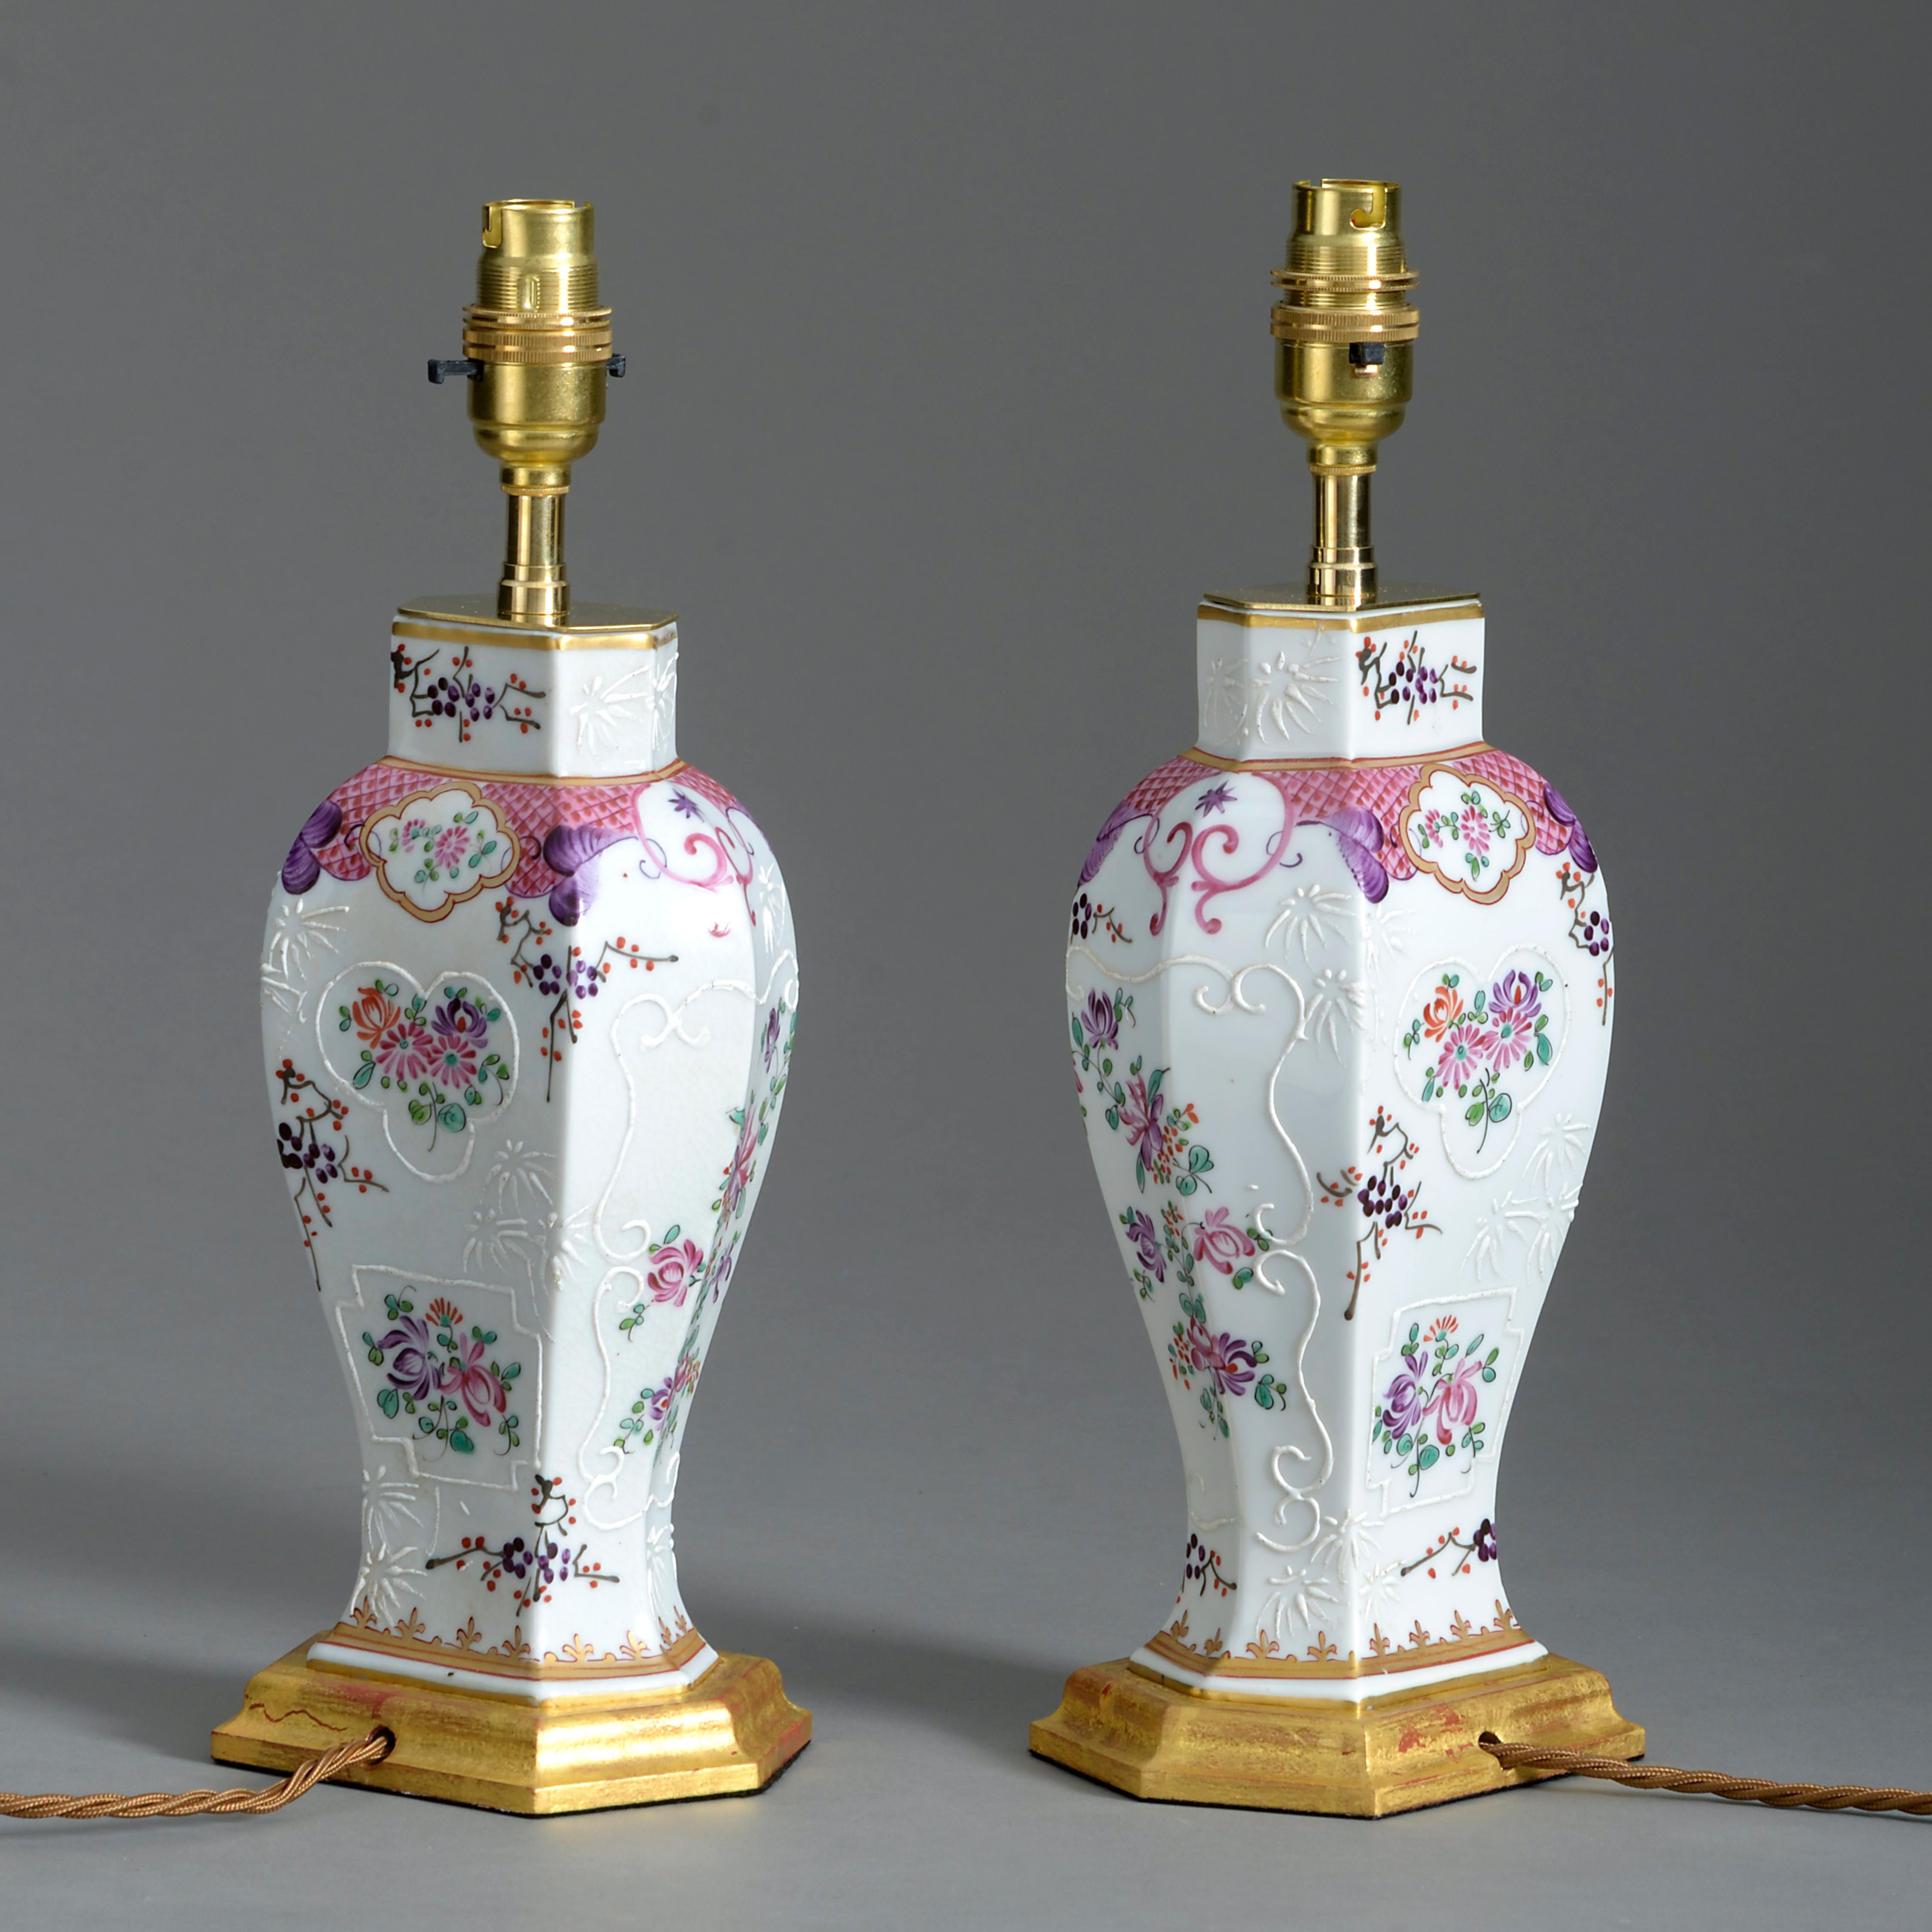 Chinese Export Pair of 19th Century Samson Famille Rose Porcelain Vase Lamps For Sale